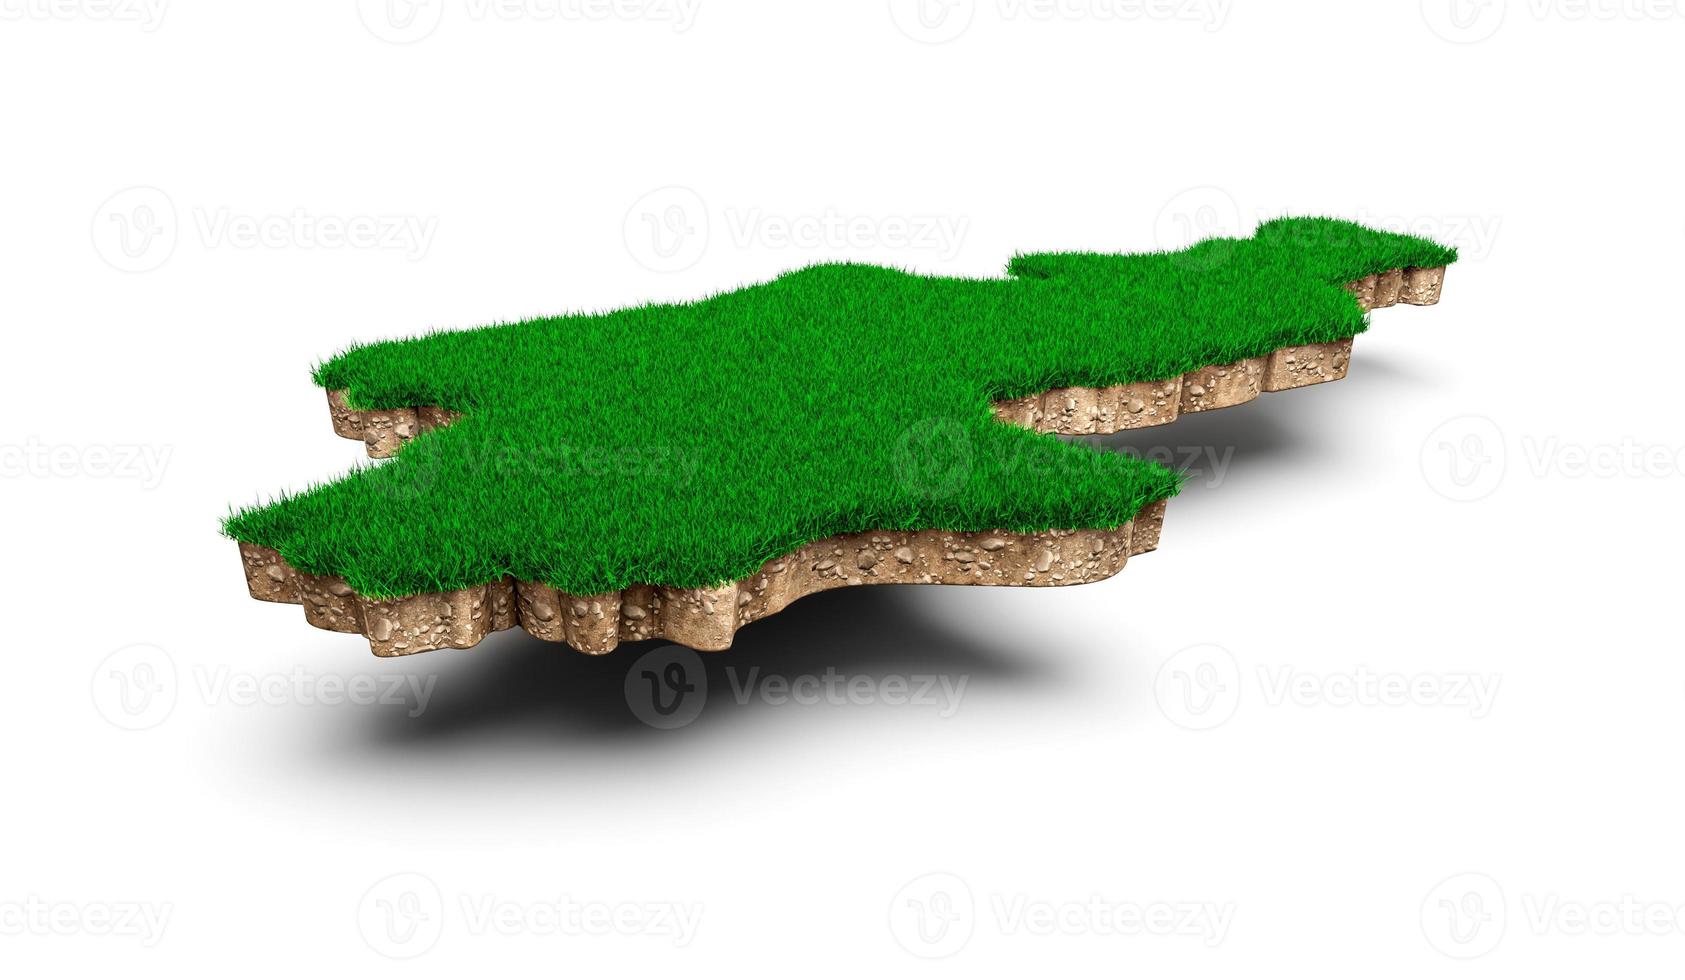 North Korea Map soil land geology cross section with green grass and Rock ground texture 3d illustration photo